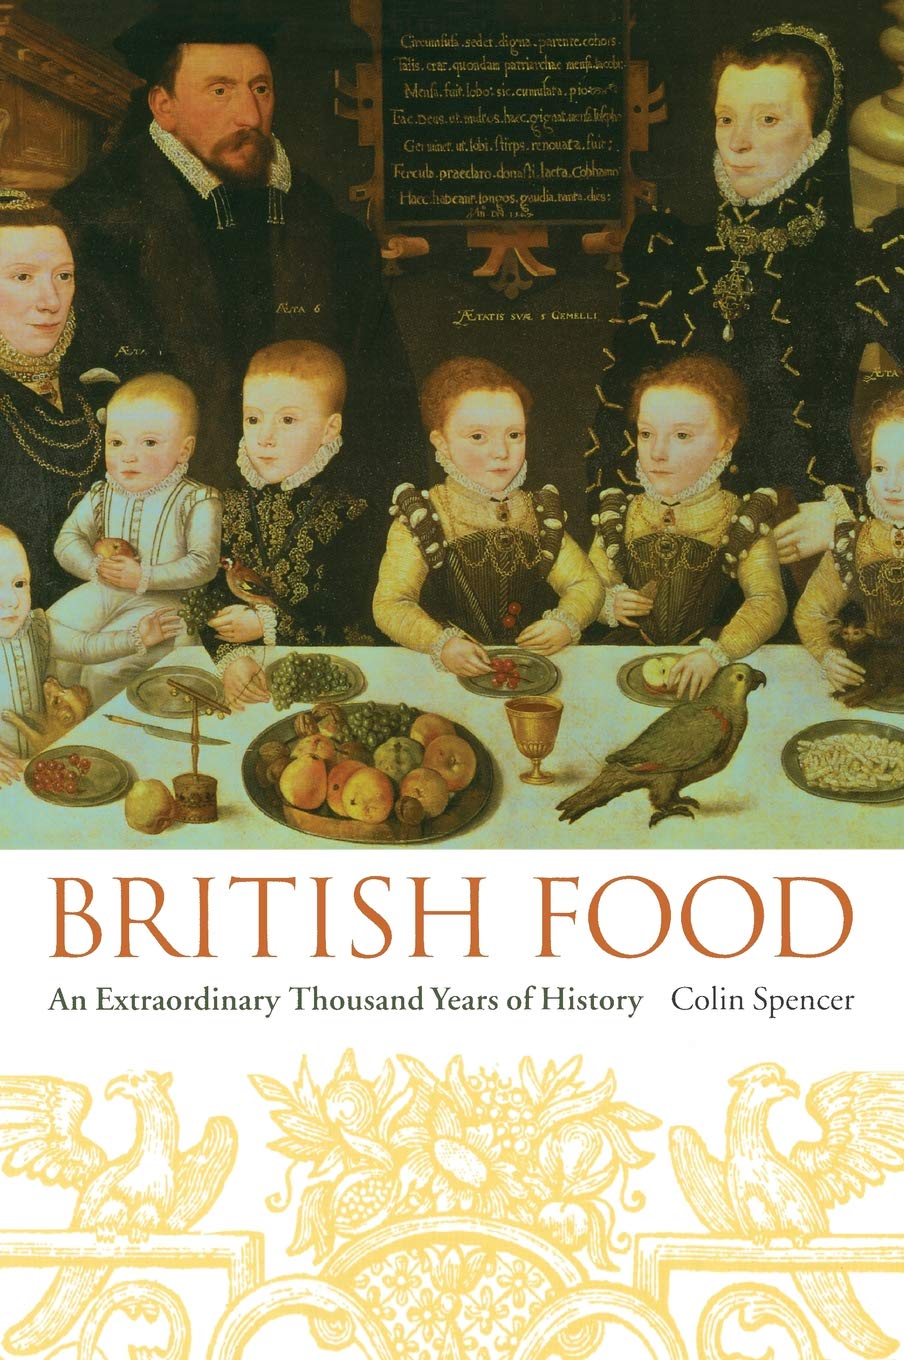 British Food: An Extraordinary Thousand Years of History (Colin Spencer)